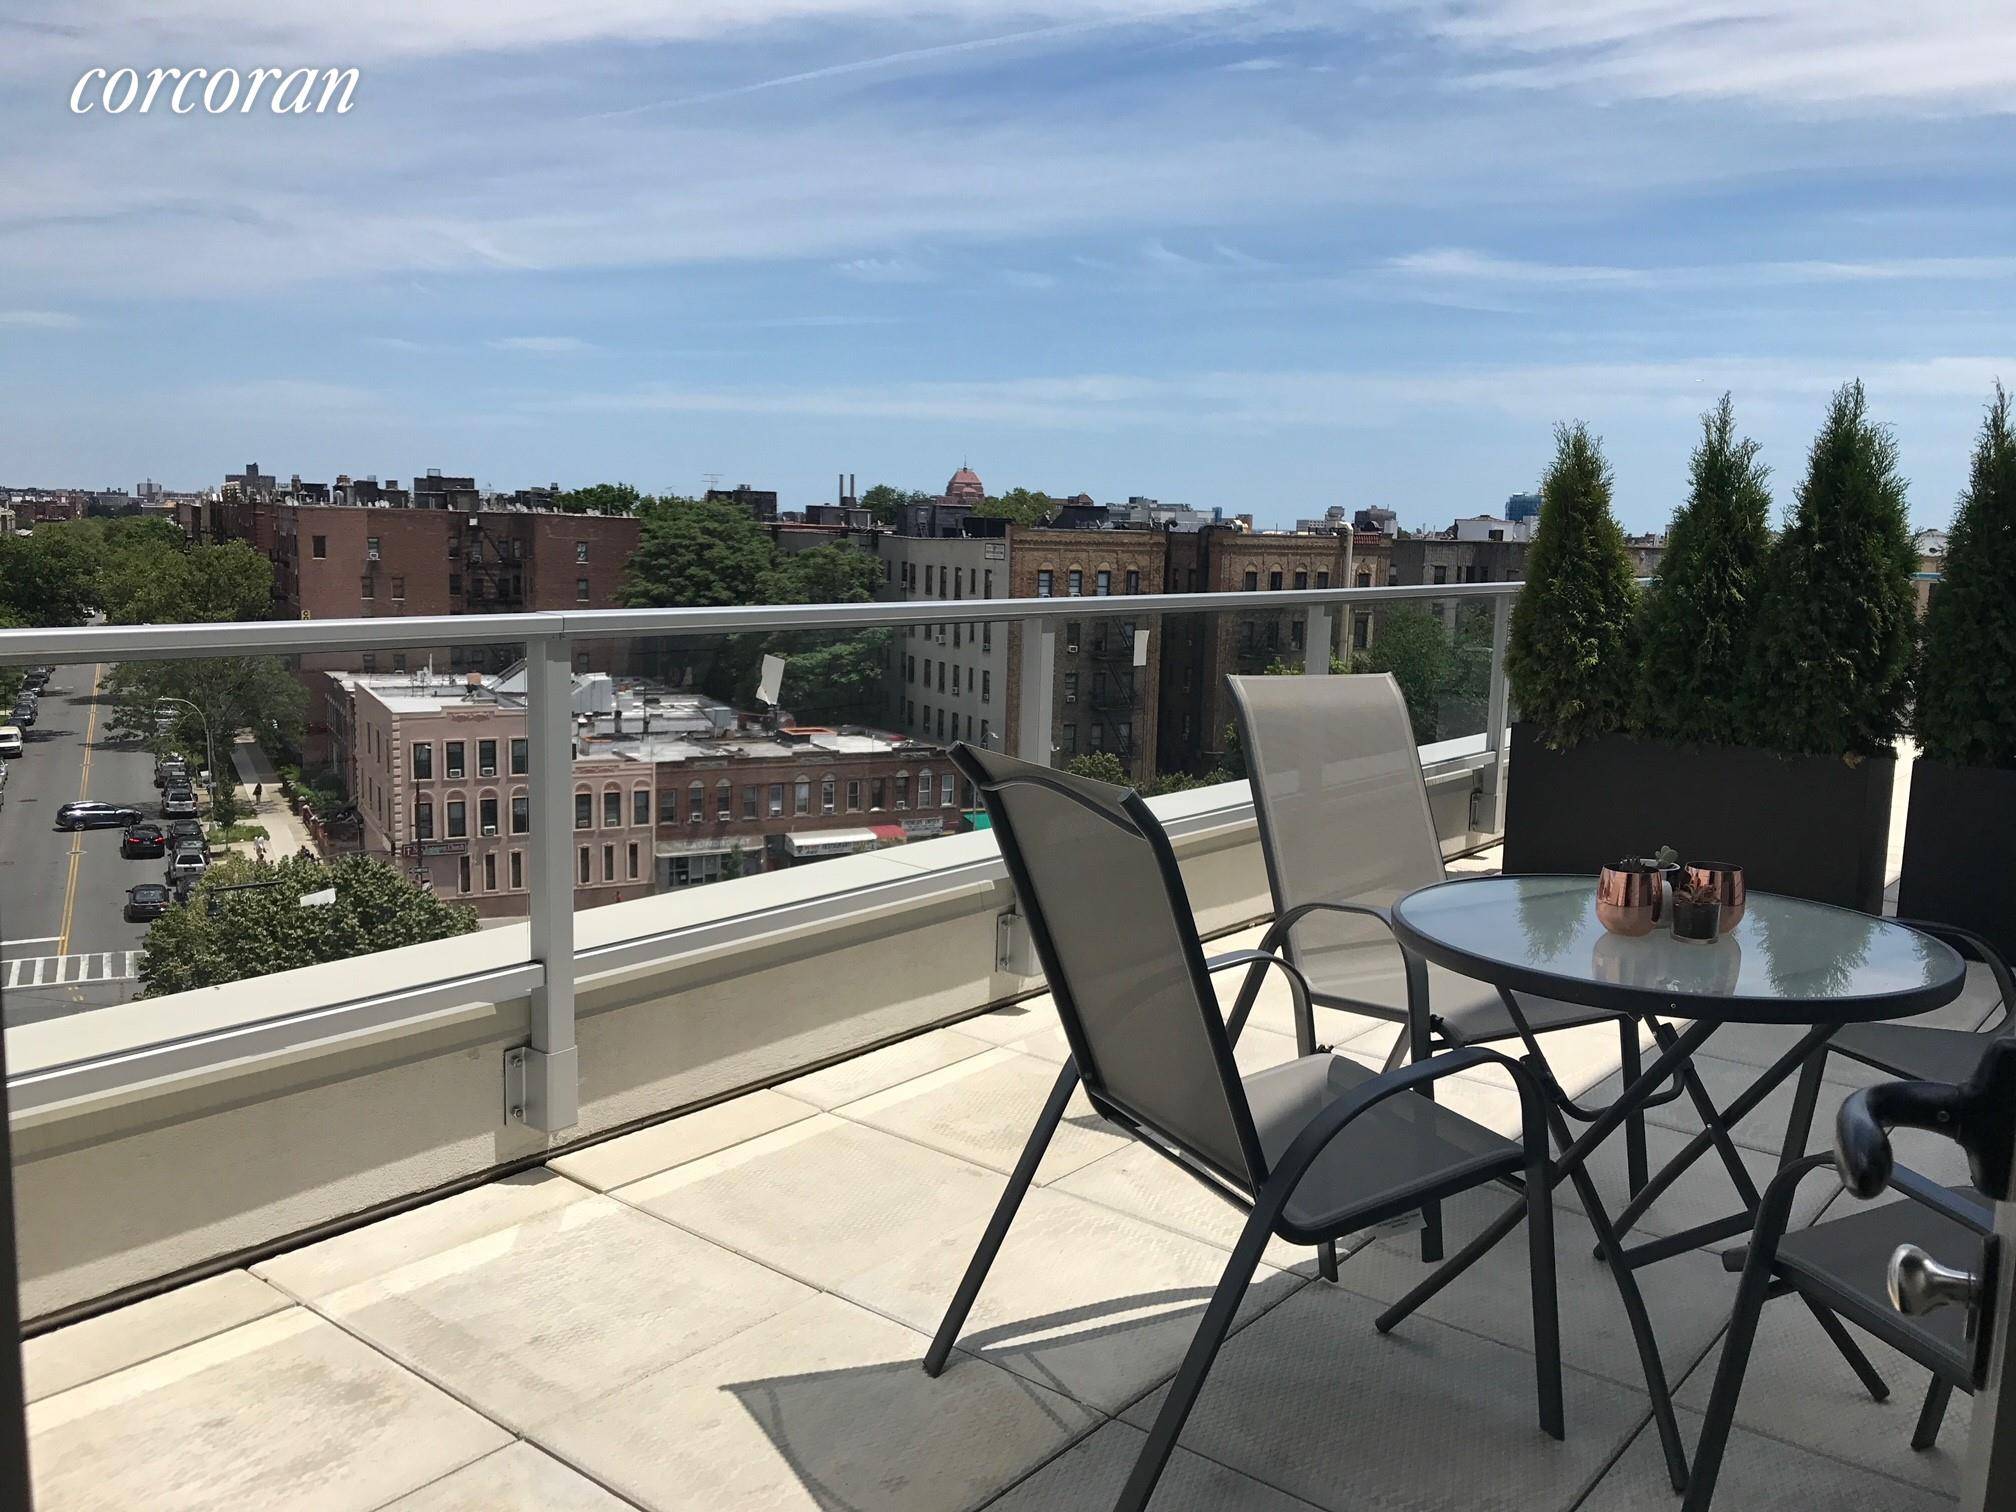 No Fee 2 Months FreeSunny, south facing one bedroom with private terrace in amenity building located at Prospect Park and B Q S trains.